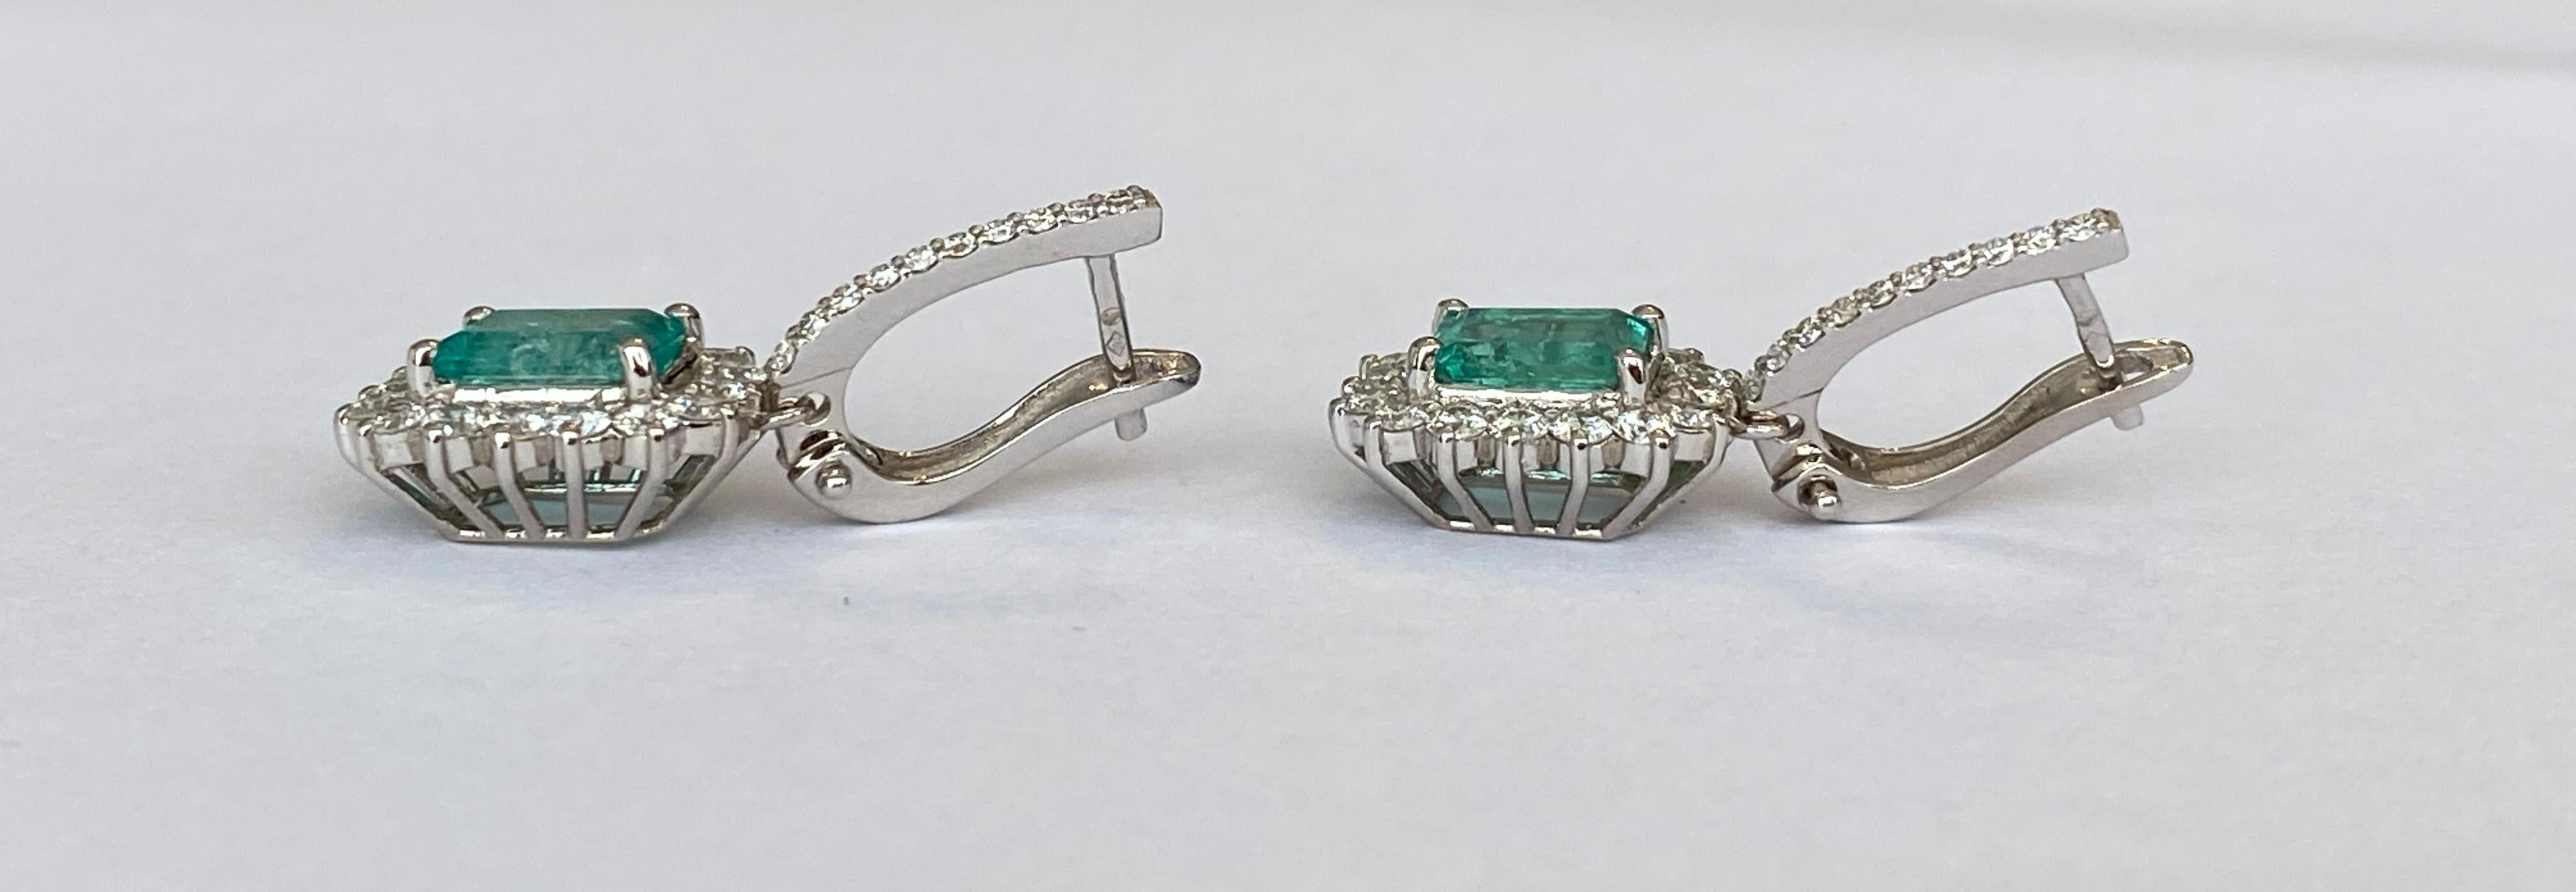 ALGT Certified 18 kt. White gold Dangle Earrings with Emerald and  Diamonds For Sale 6